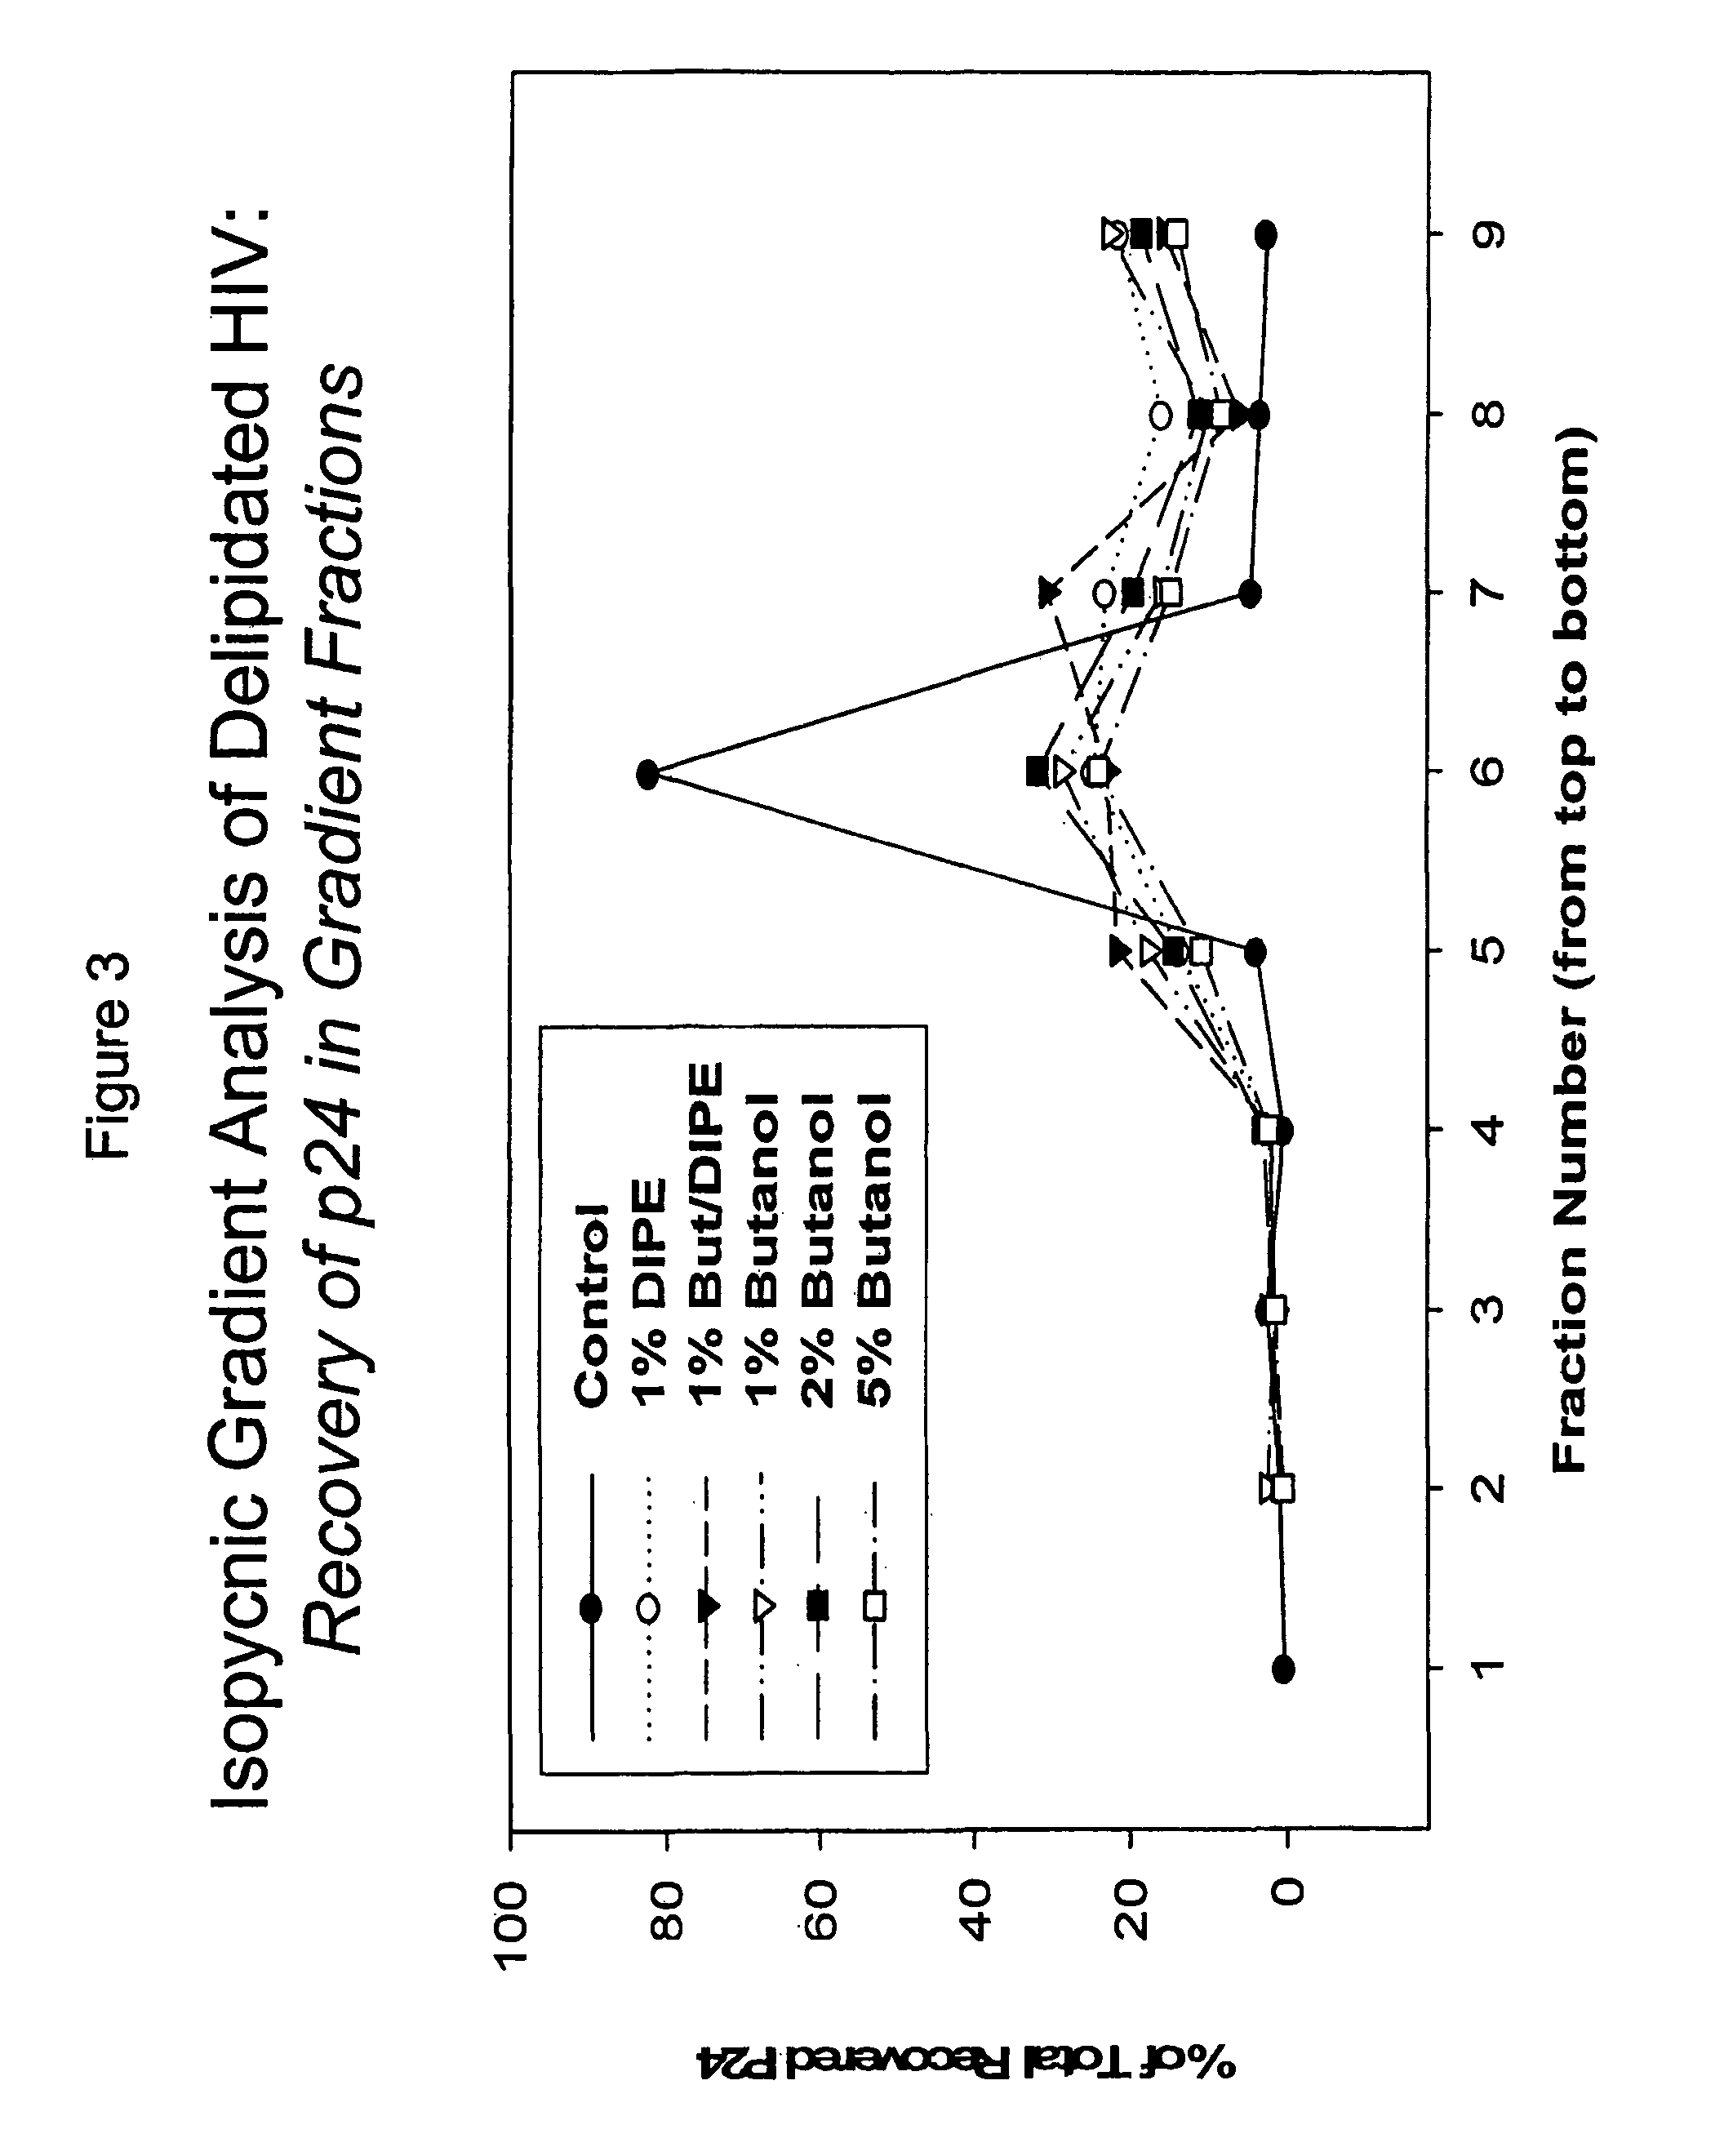 Method of making modified immunodeficiency virus particles